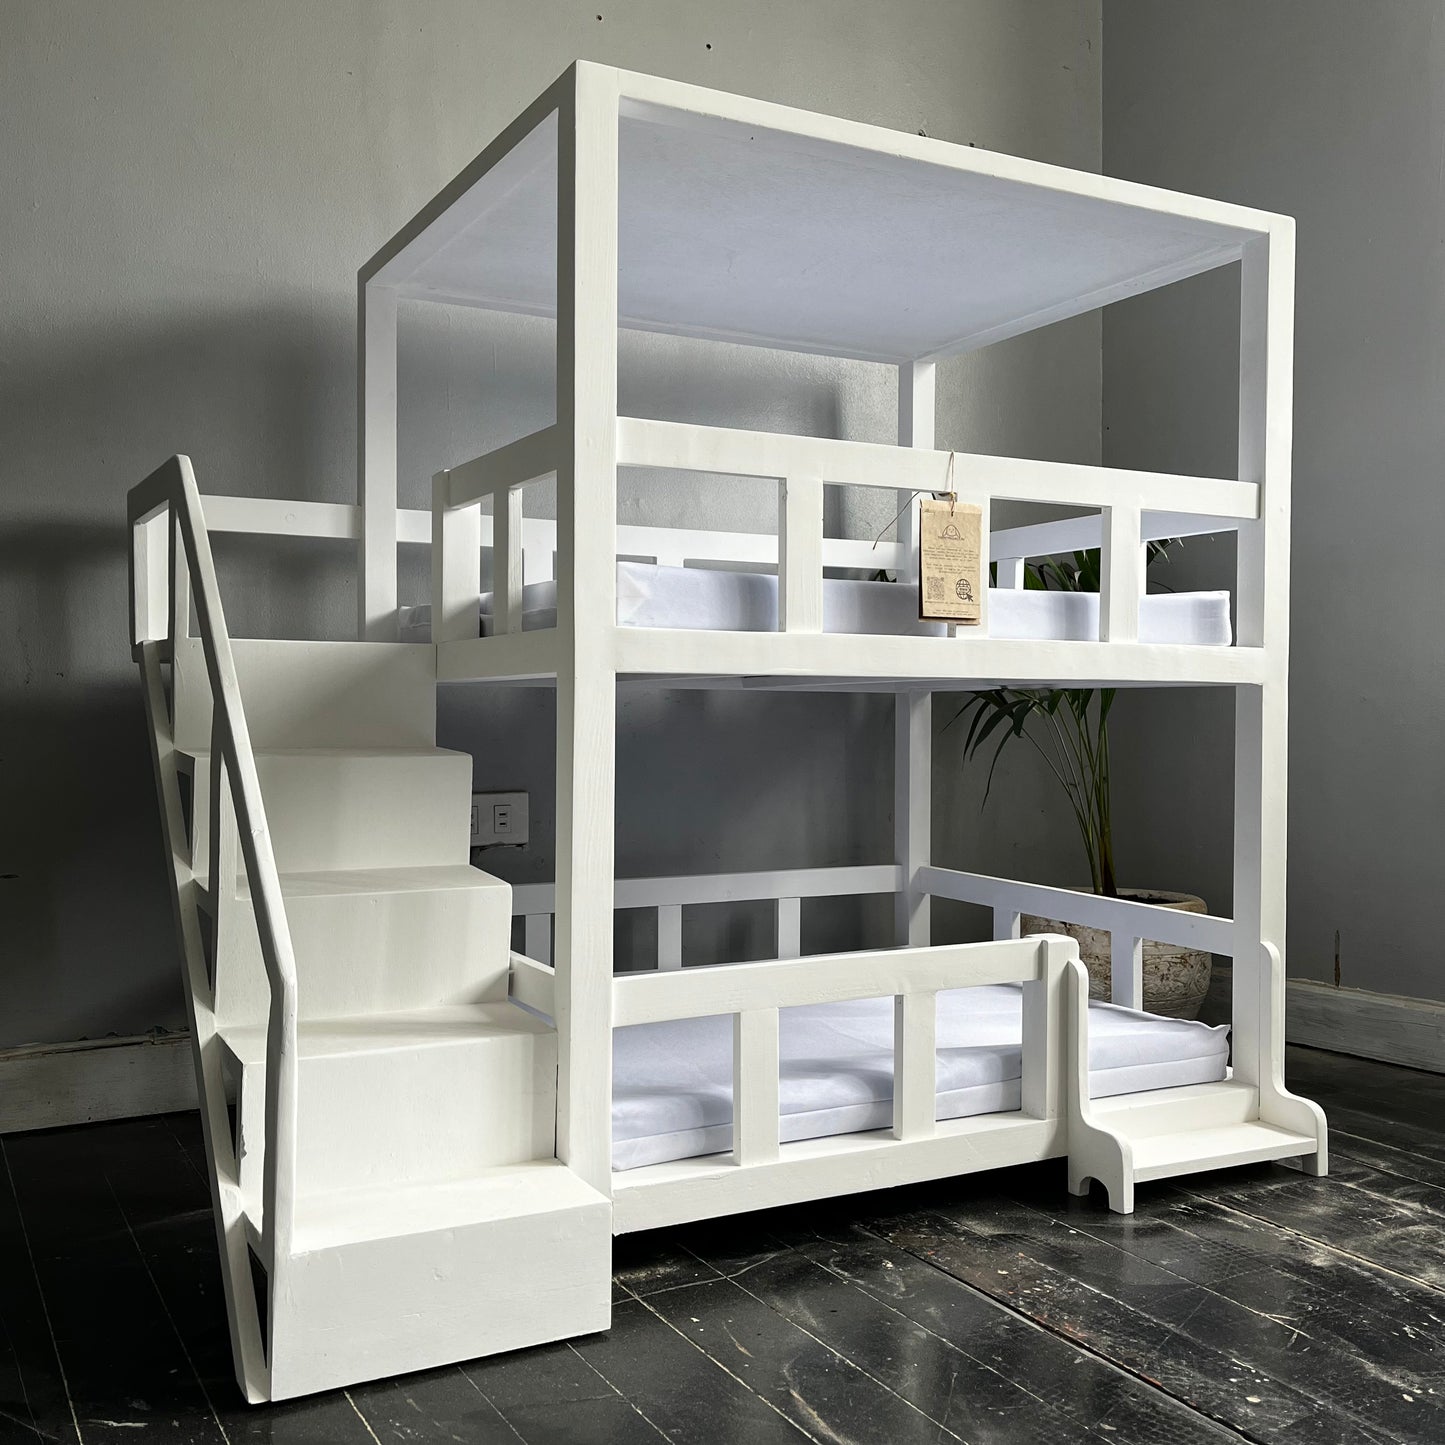 Table Top Double Deck Bed